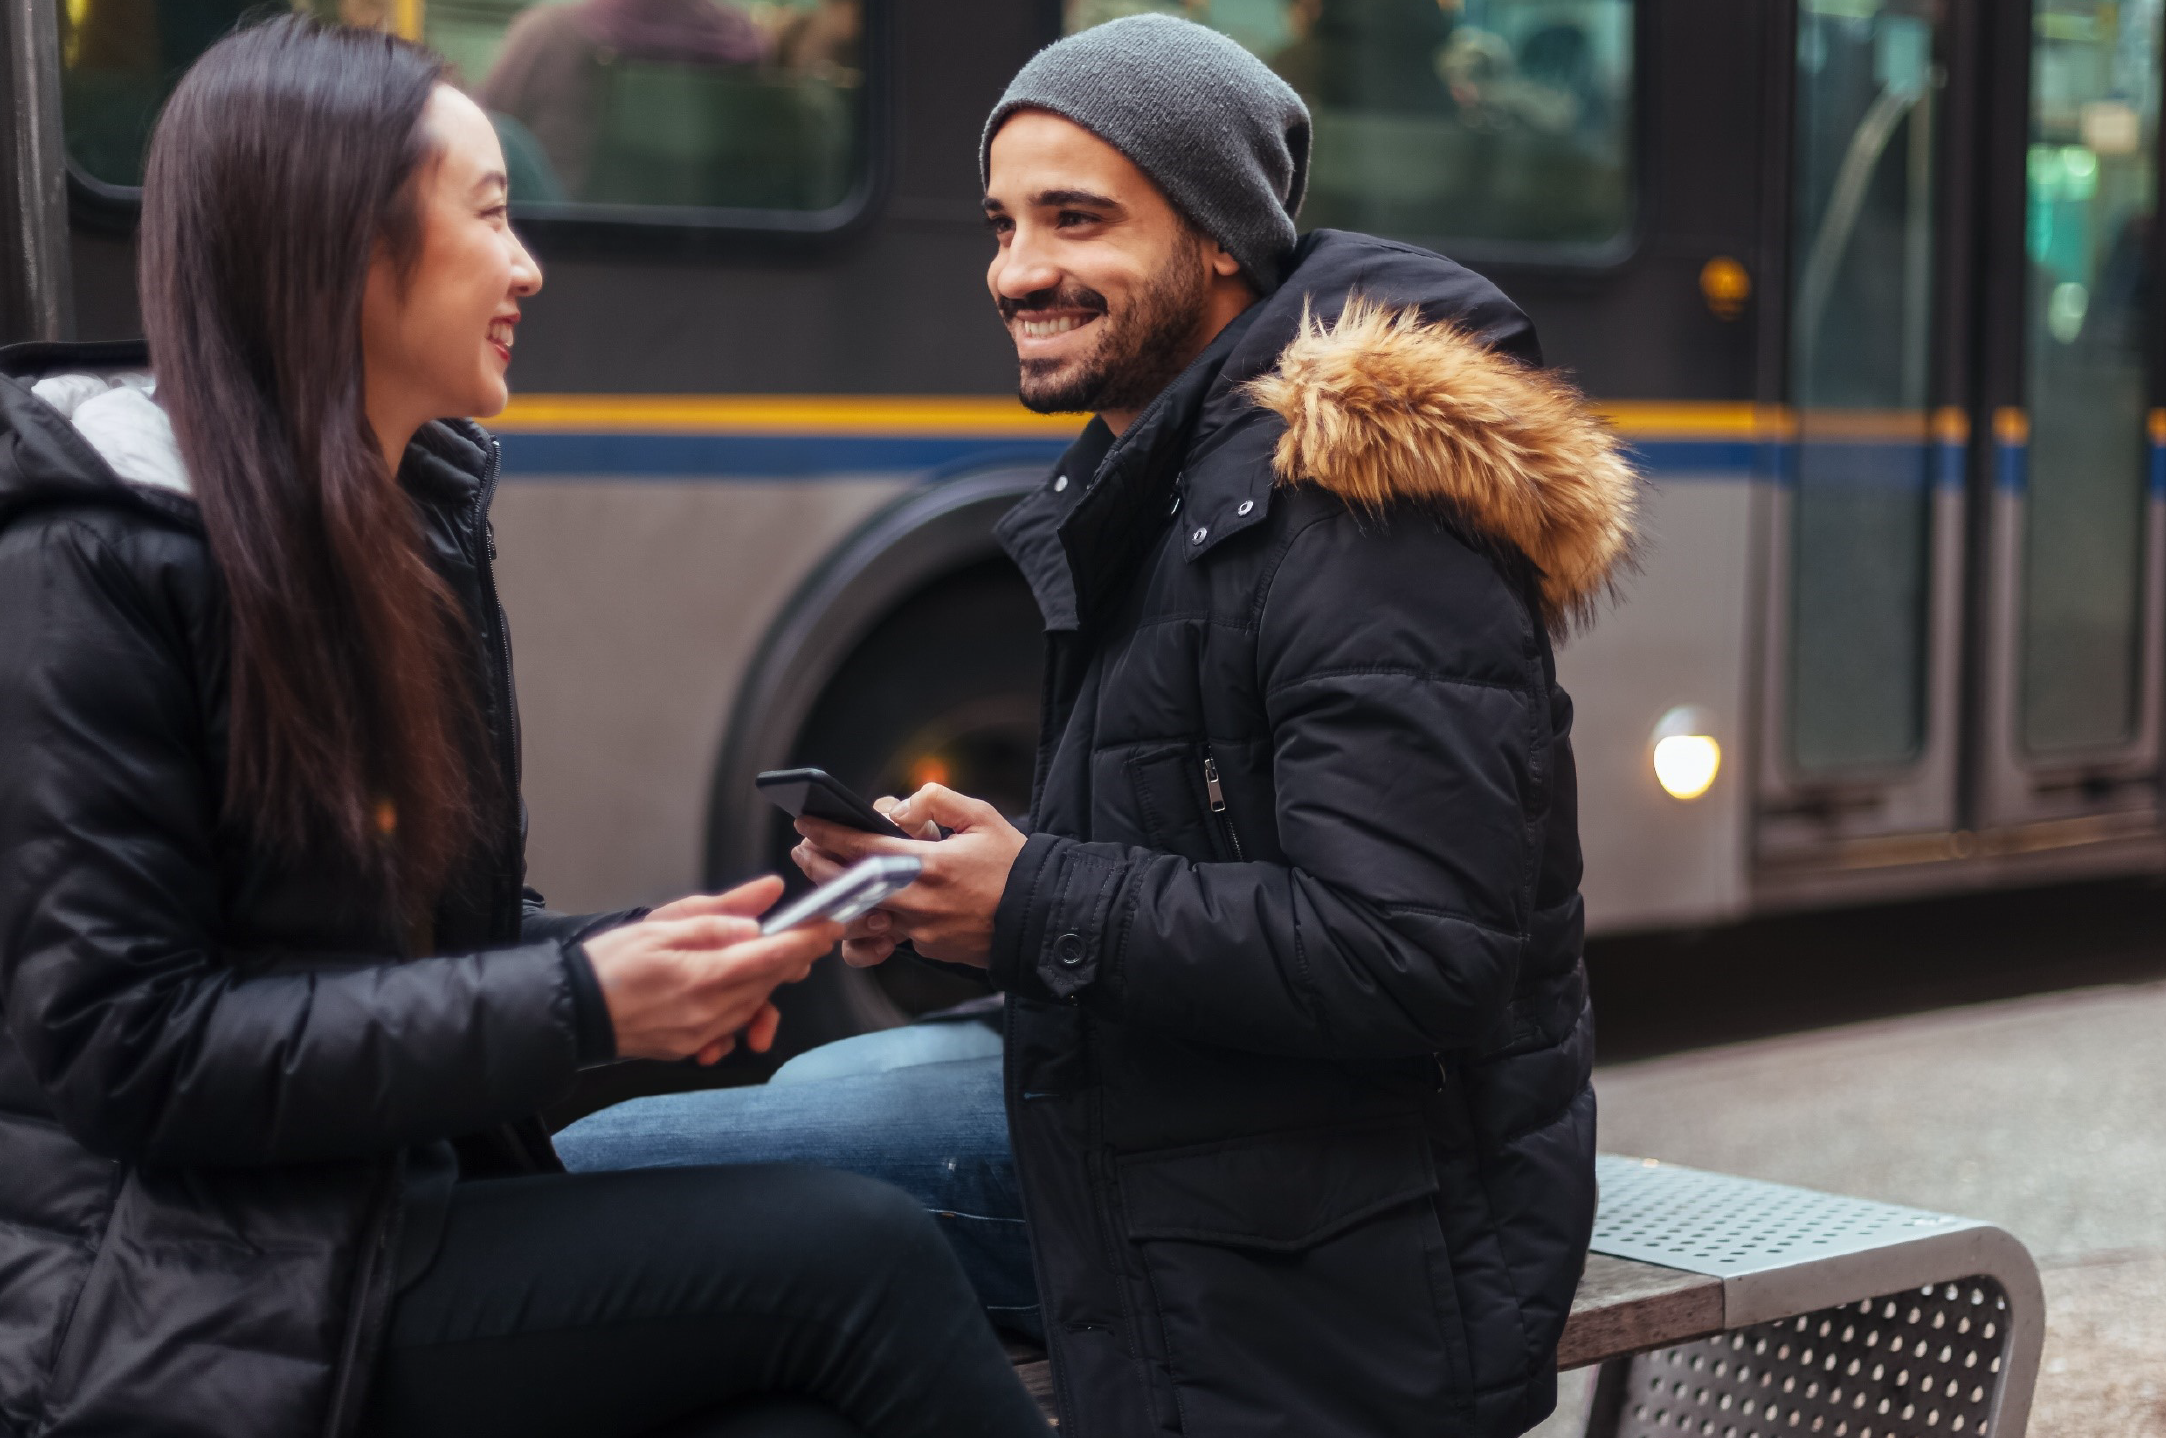 Two people smiling at each other sitting on a bench holding their phones with a bus driving by behind them.